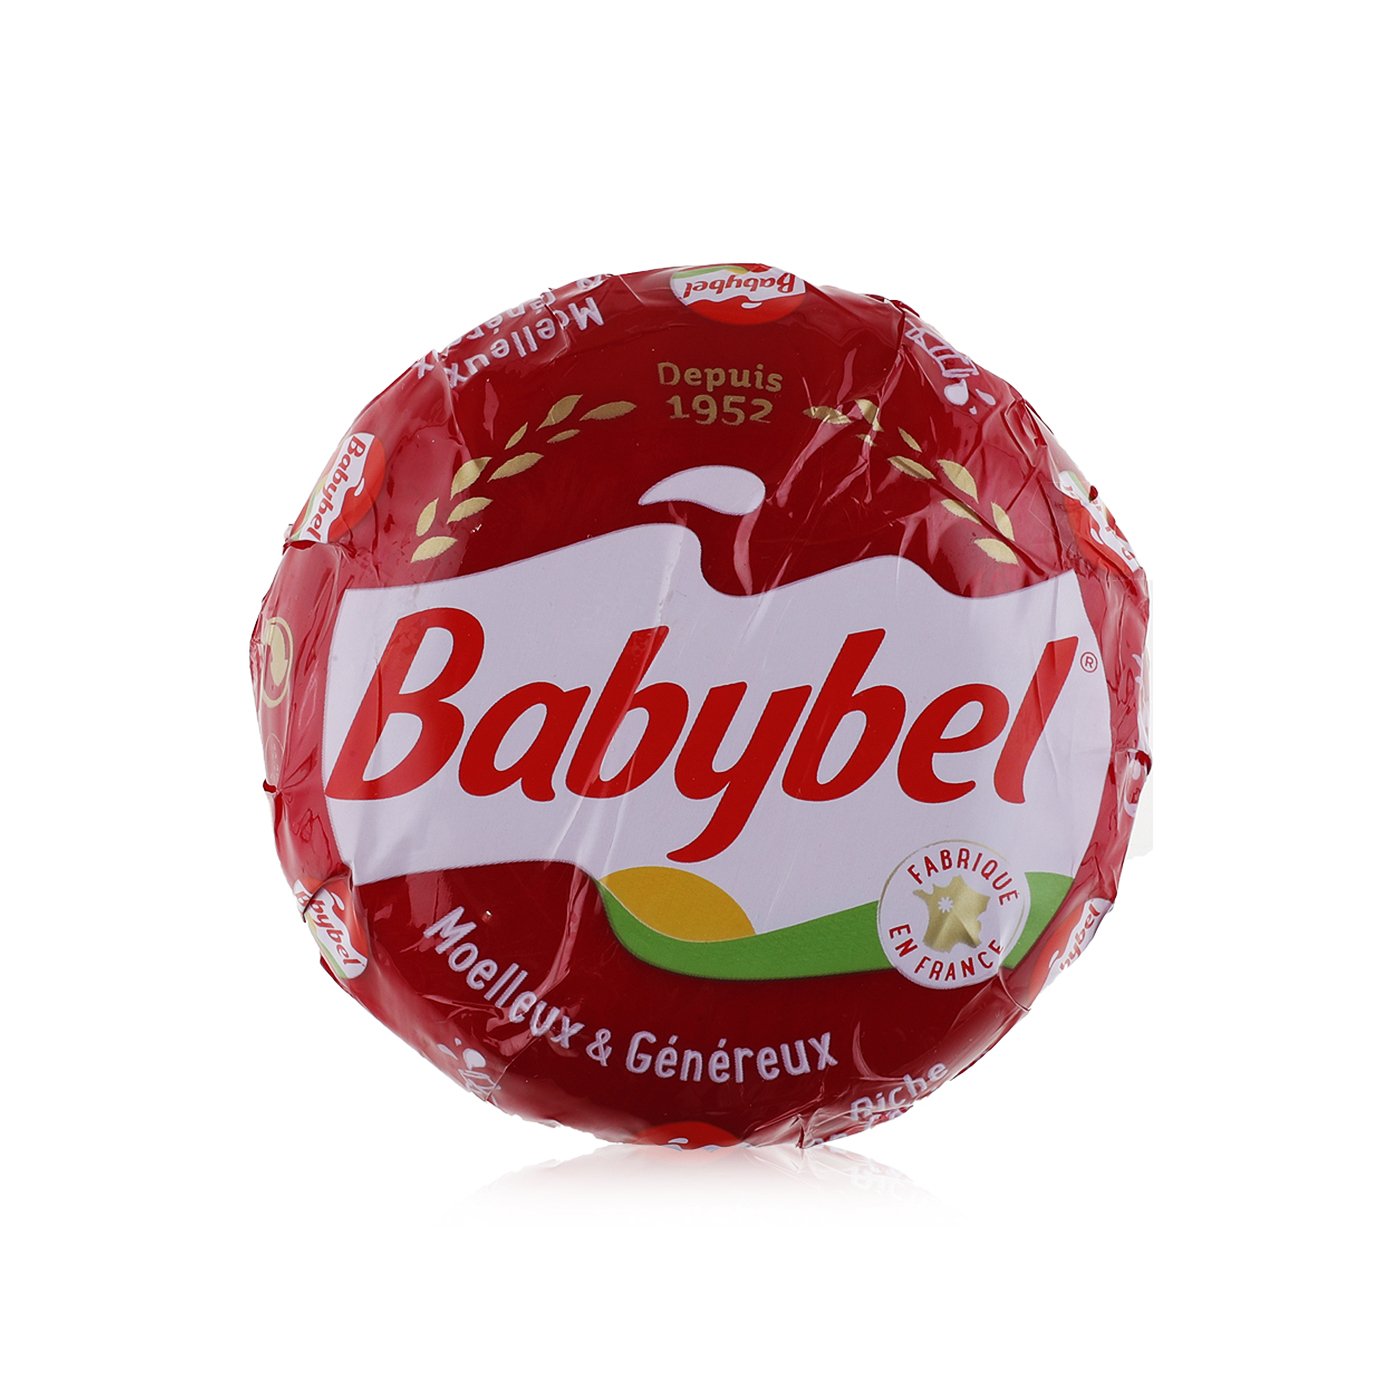 The Laughing Cow Babybel cheese 200g